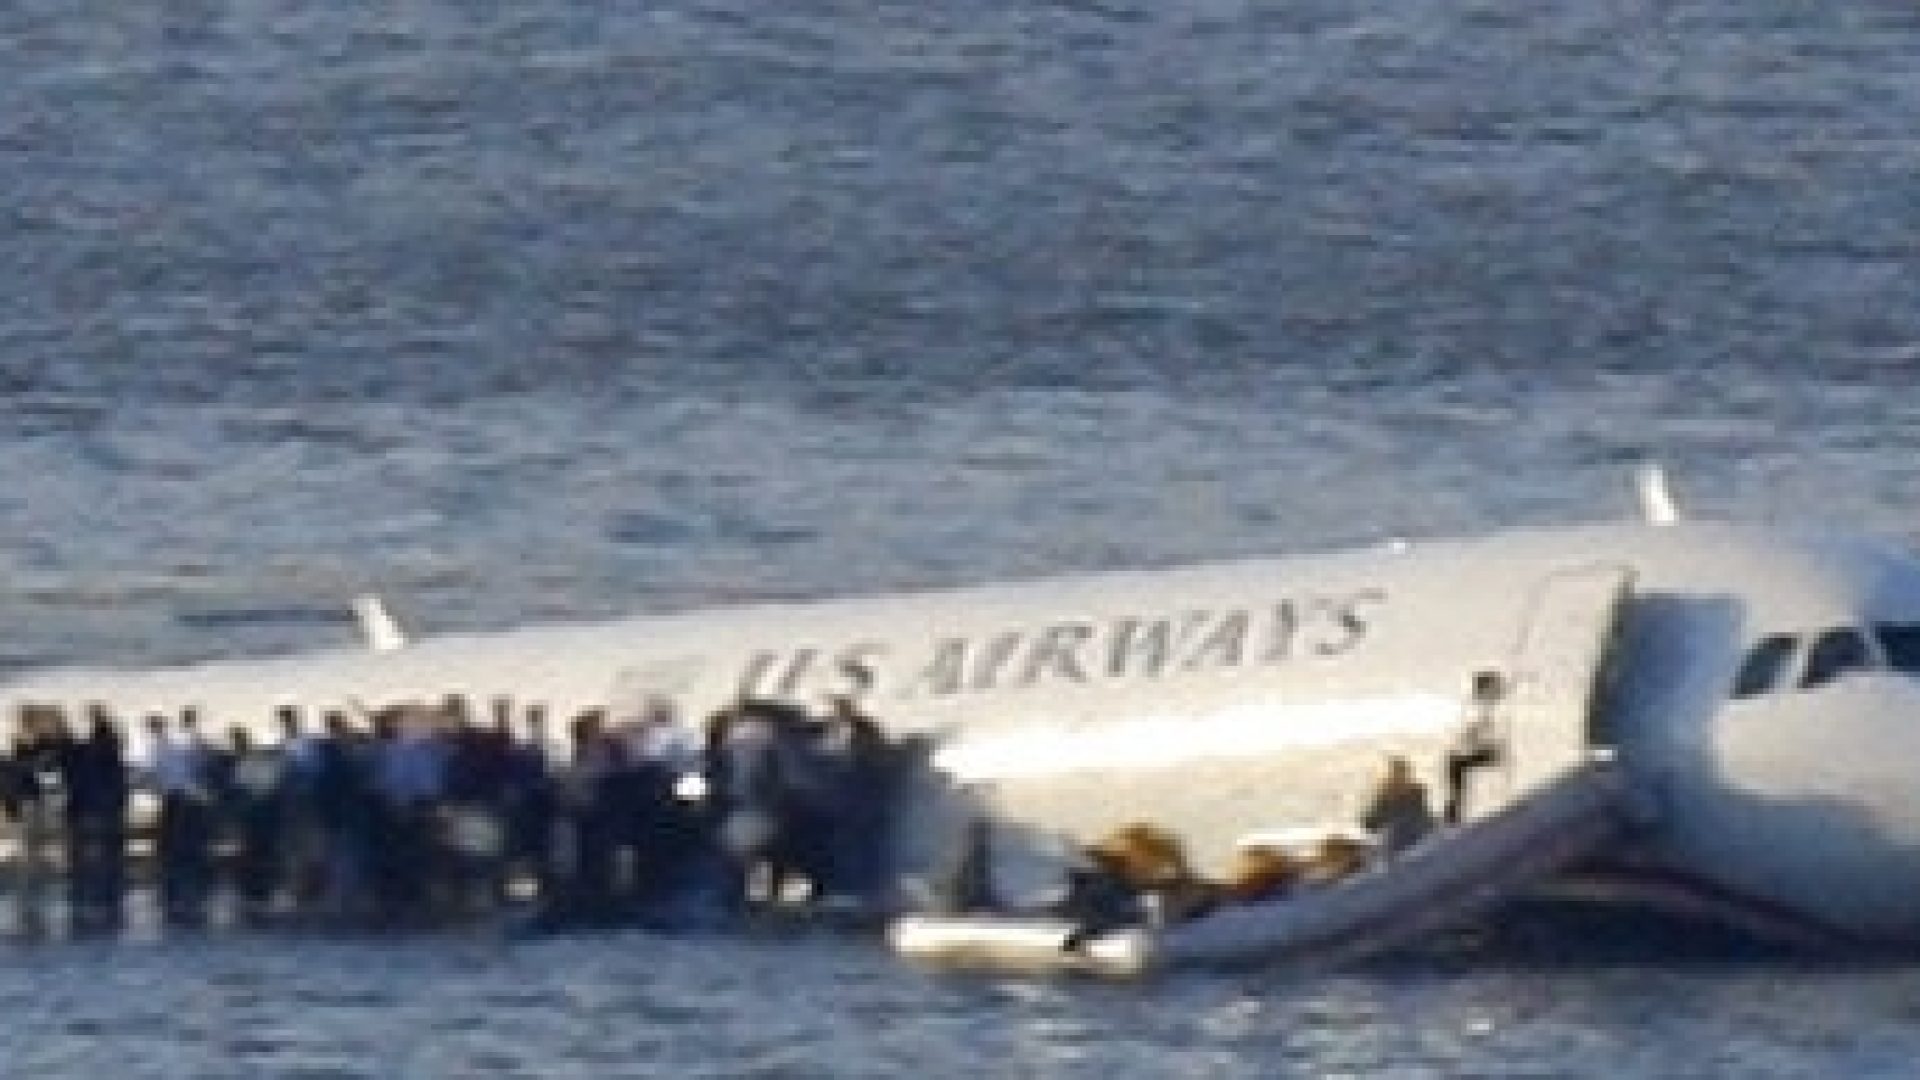 Passengers stand on the wings of a U.S. Airways plane as a ferry pulls up to it after it landed in the Hudson River in New York